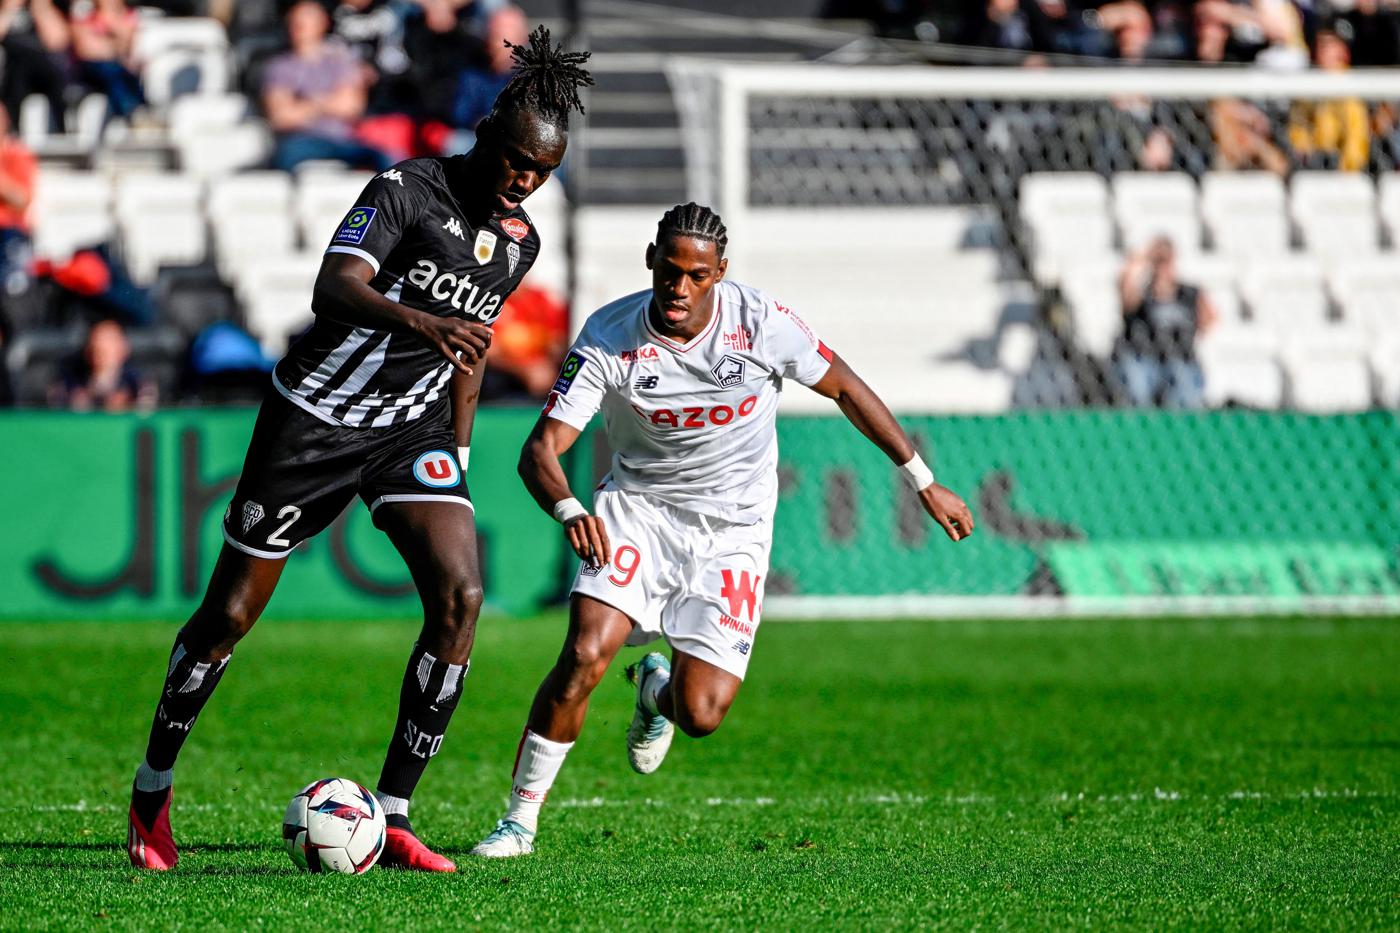 Angers - Lille - 1:0. French Championship, round 30. Match Review, Statistics